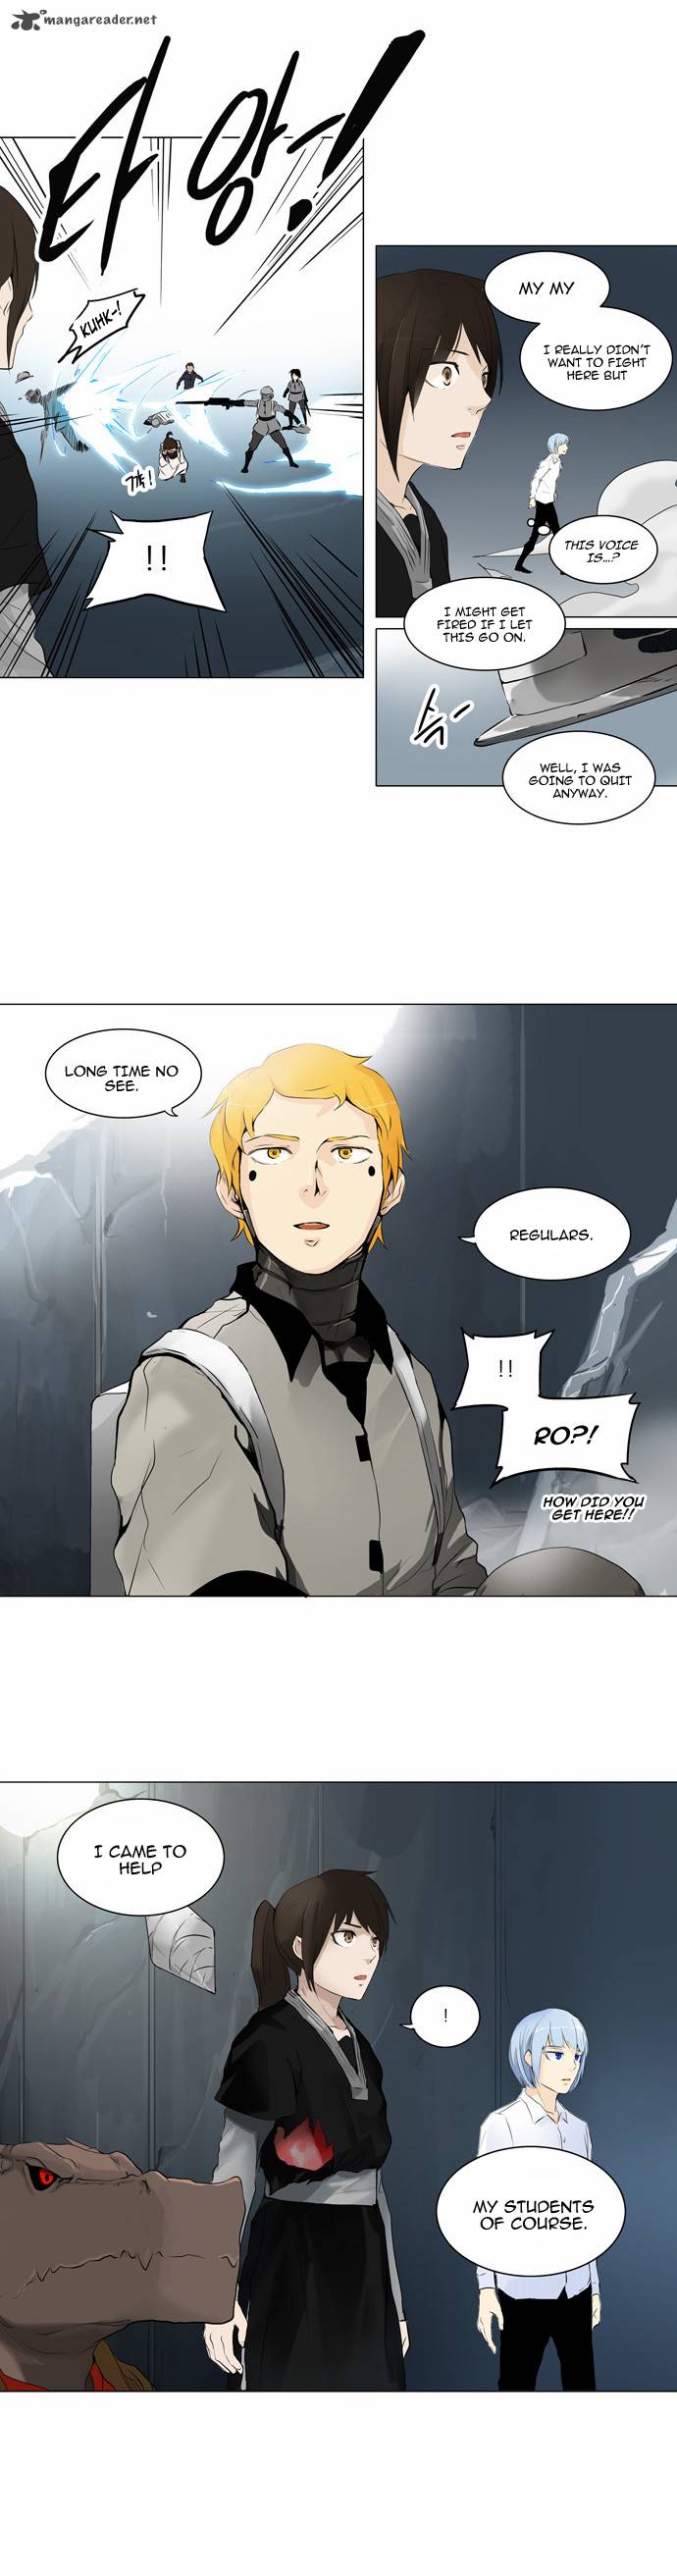 Tower Of God 176 17